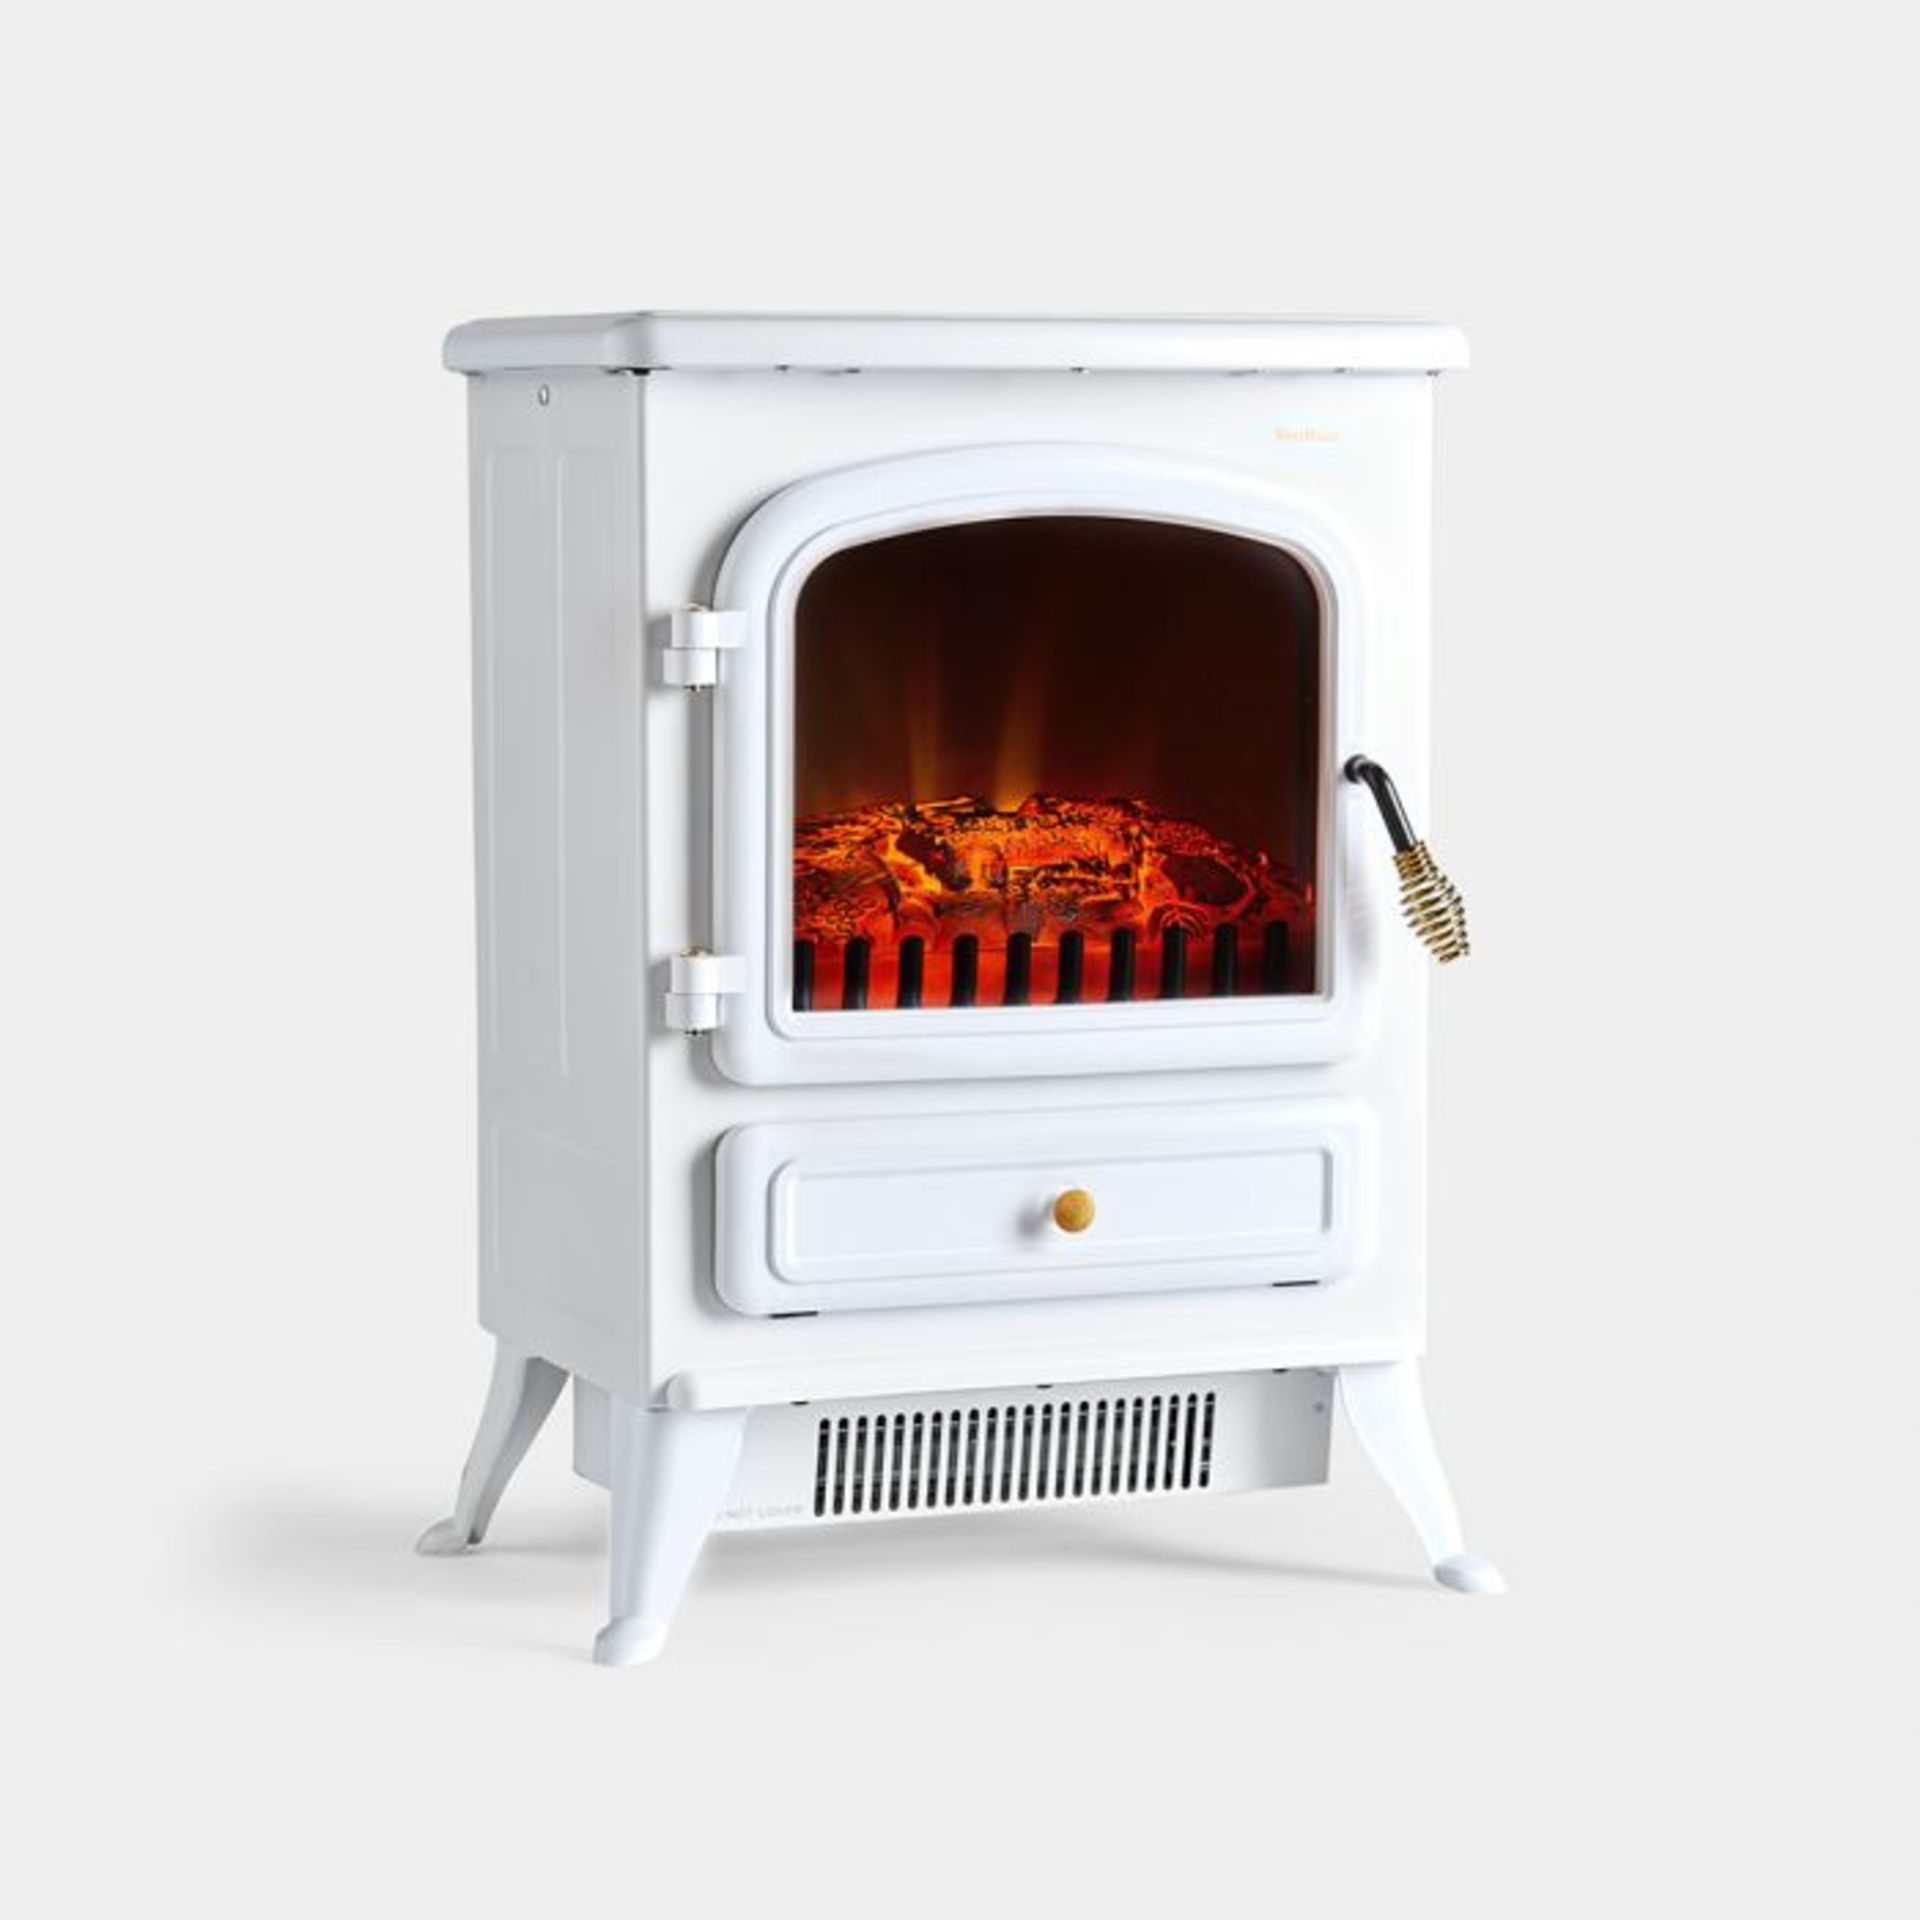 (V63) 1850W Portable Electric Stove Heater Beautifully designed freestanding small stove heate... - Image 2 of 4